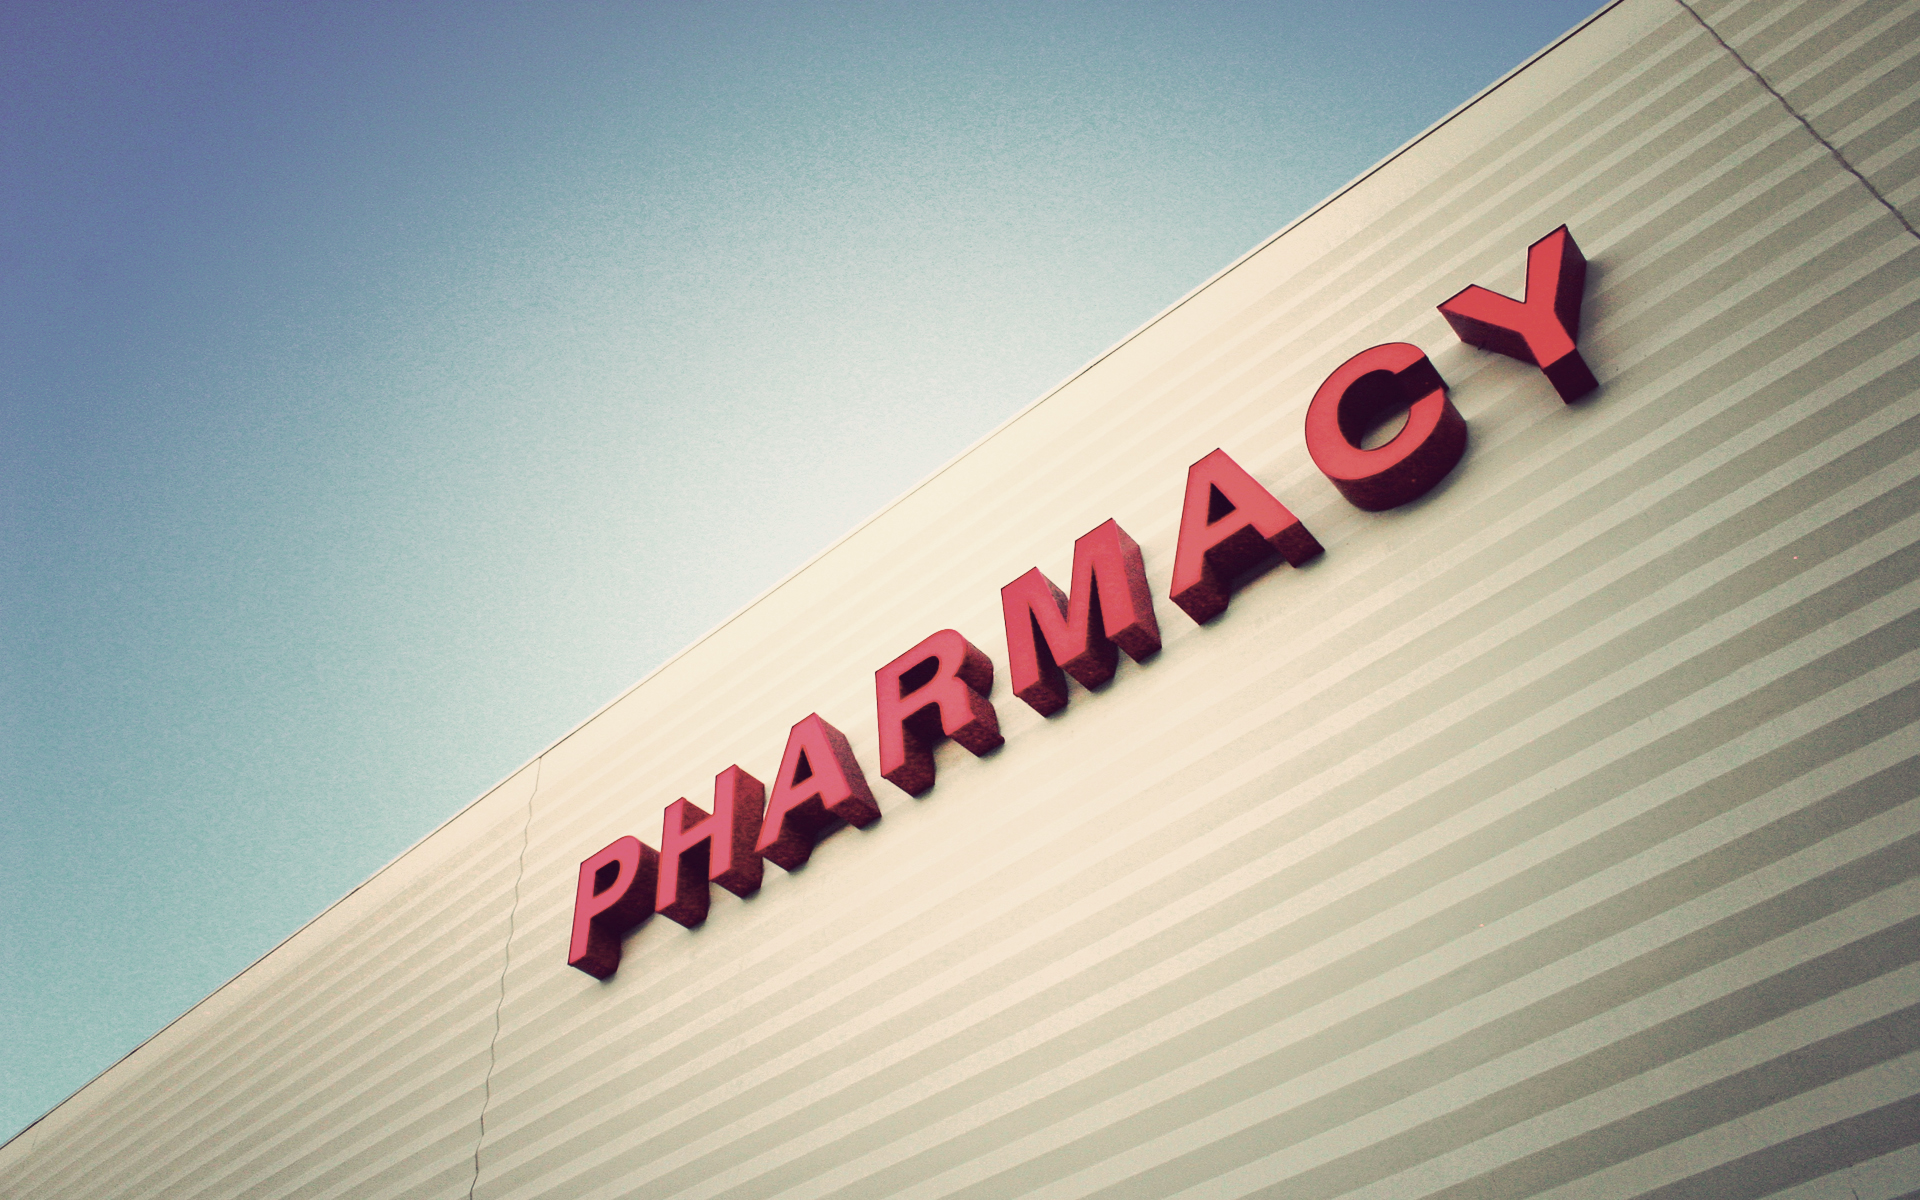 Pharmacy HD Wallpaper Top Pictures Gallery Online